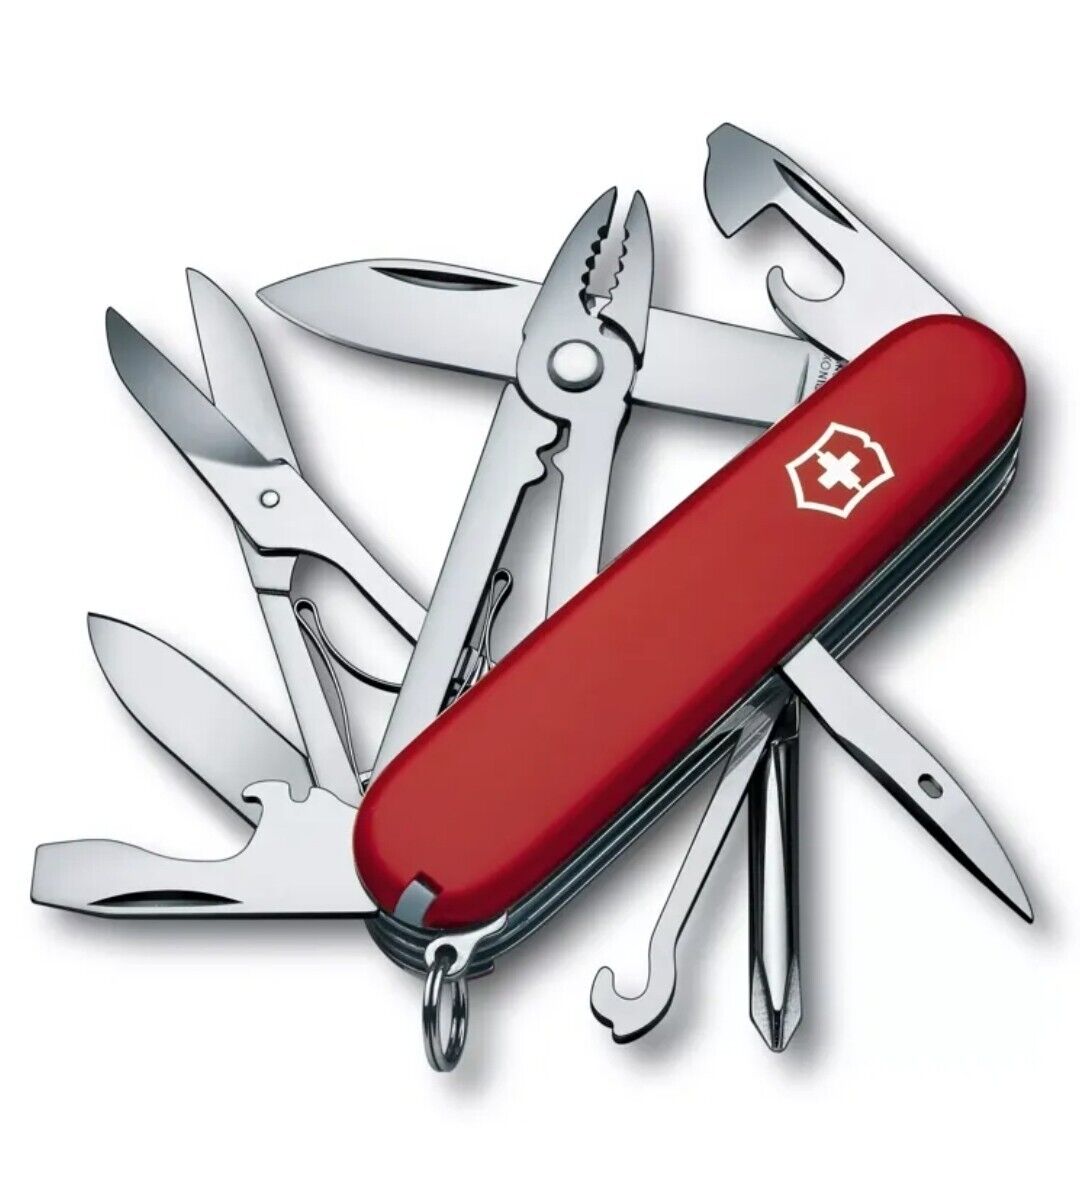 New Victorinox Swiss Army DELUXE TINKER Multi Tool Red 91MM  1.4723 With Box